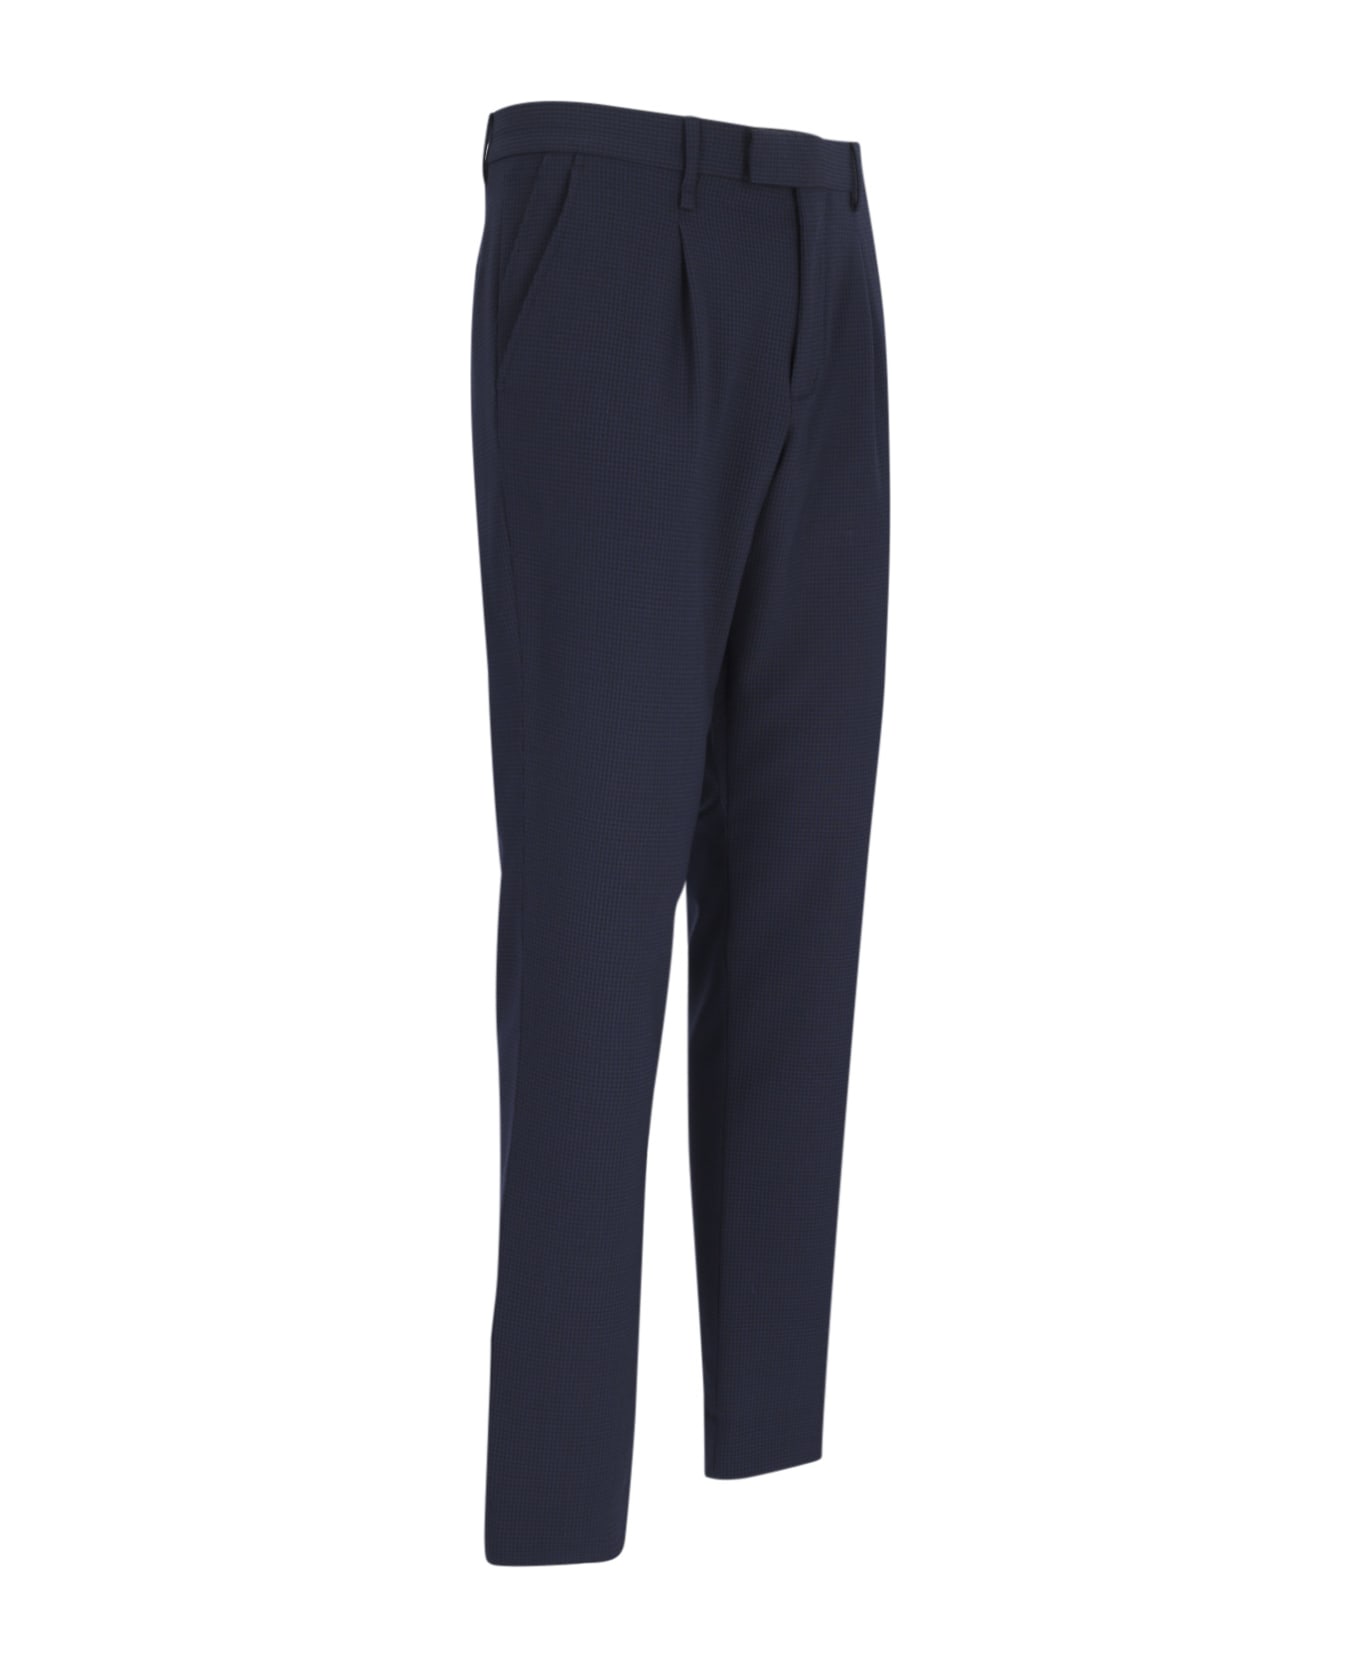 Paul Smith Check Trousers - Blue